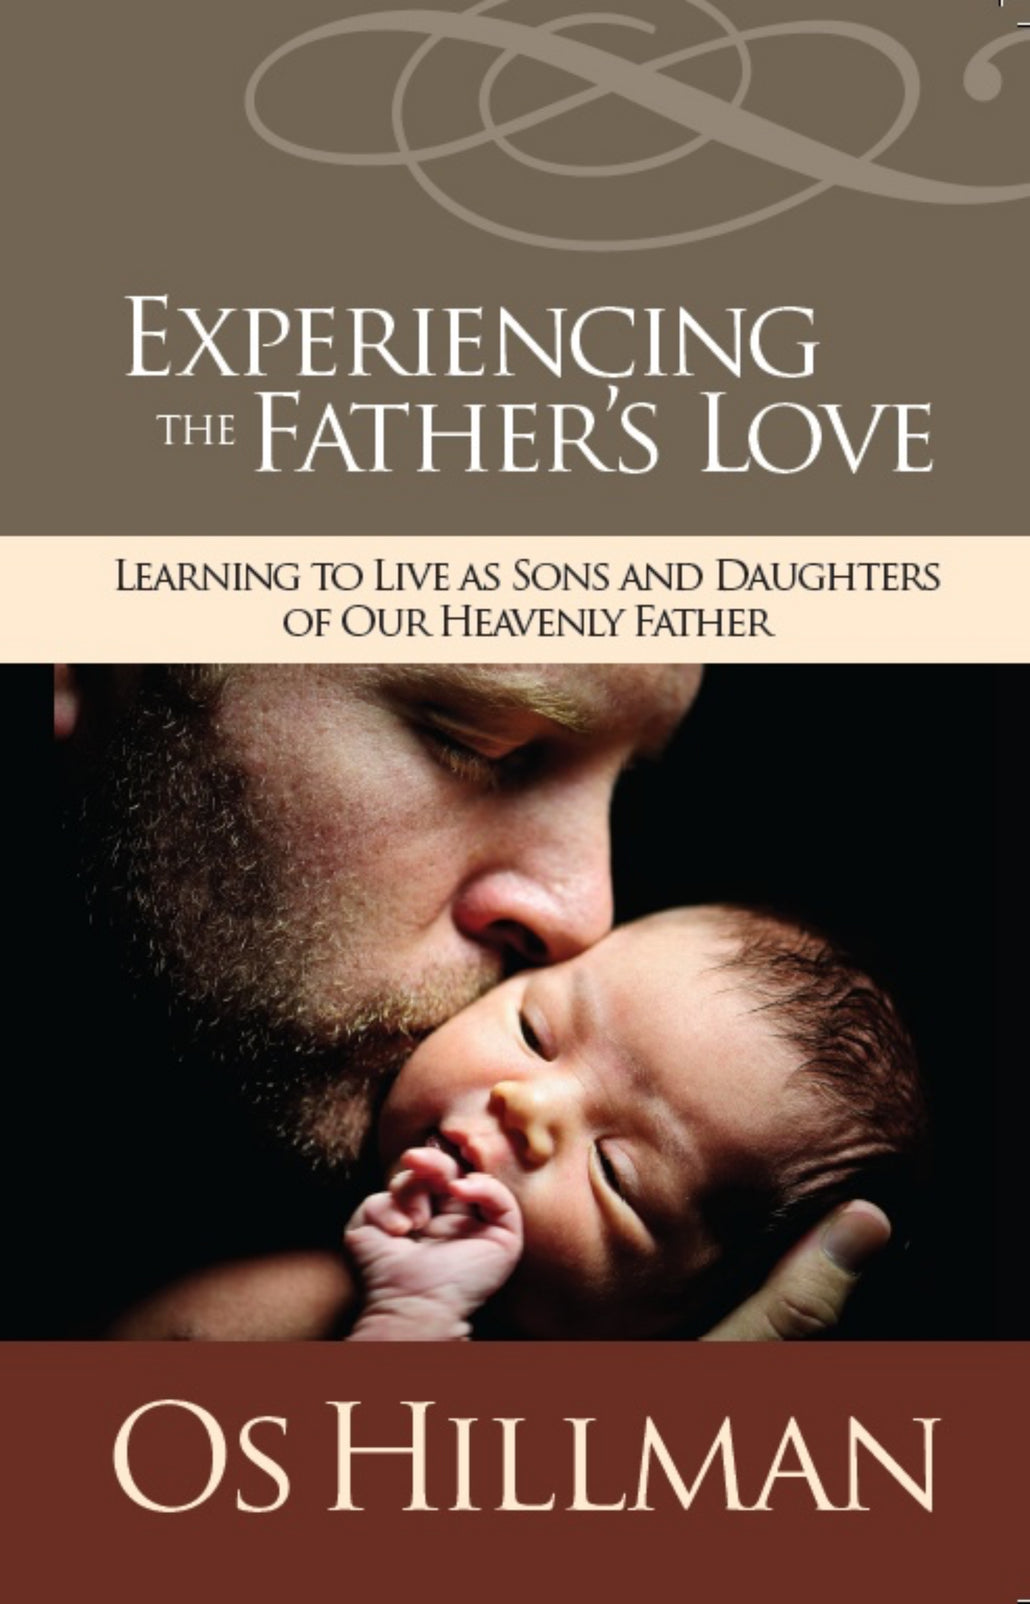 Experiencing the Father’s Love: Learning To Live As Sons And Daughters Of Our Heavenly Fathers